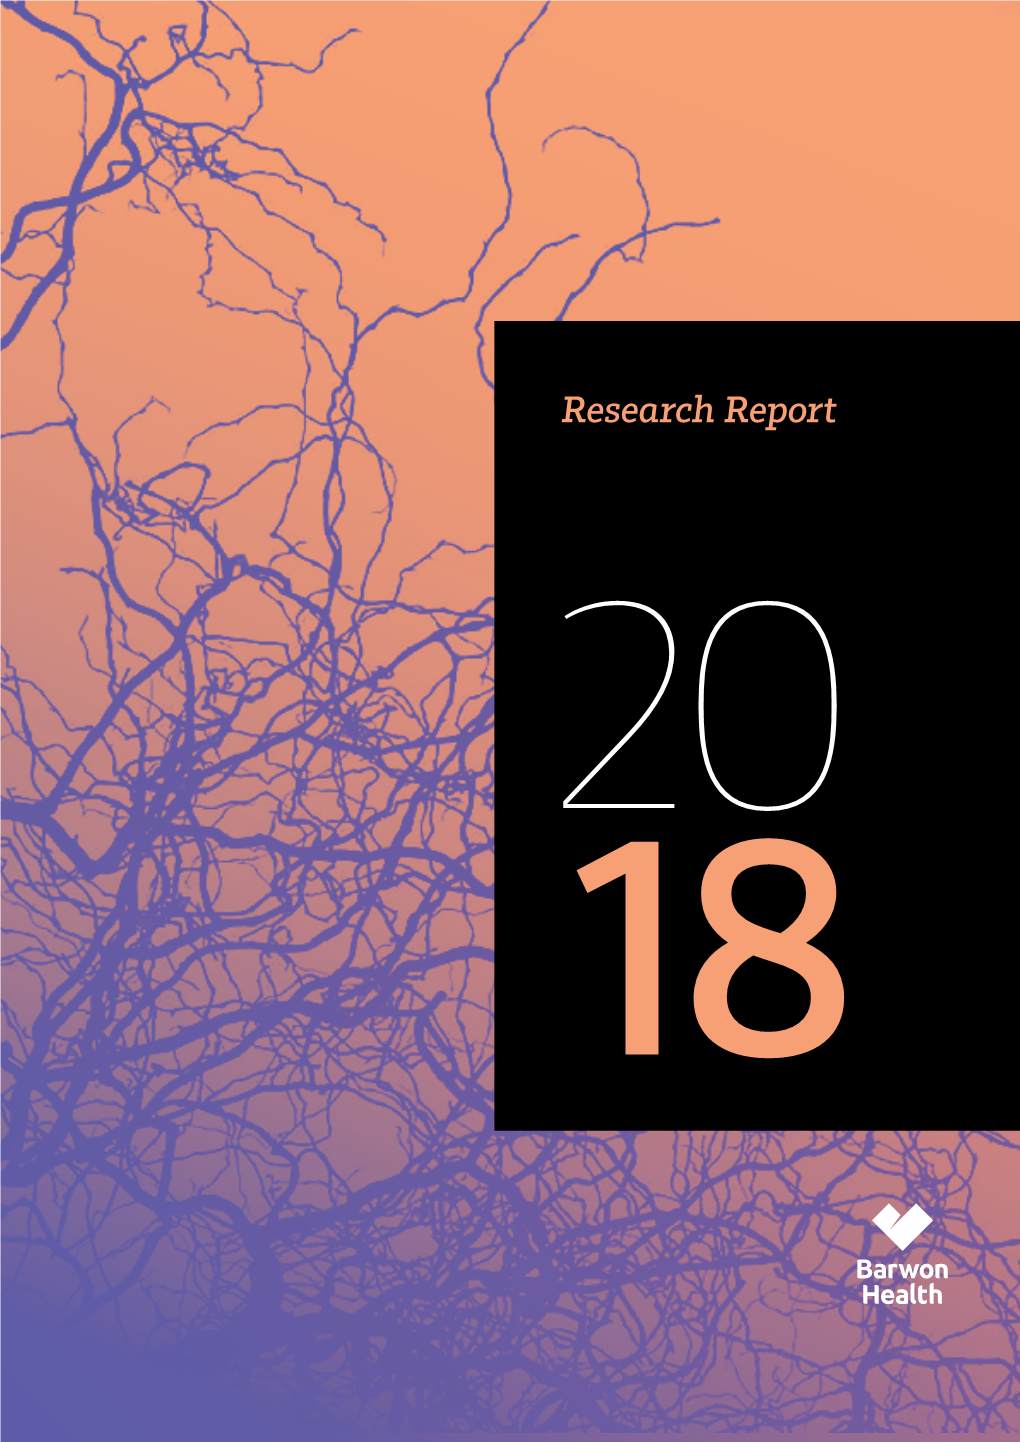 BARWON HEALTH RESEARCH REPORT 2018 Foreword